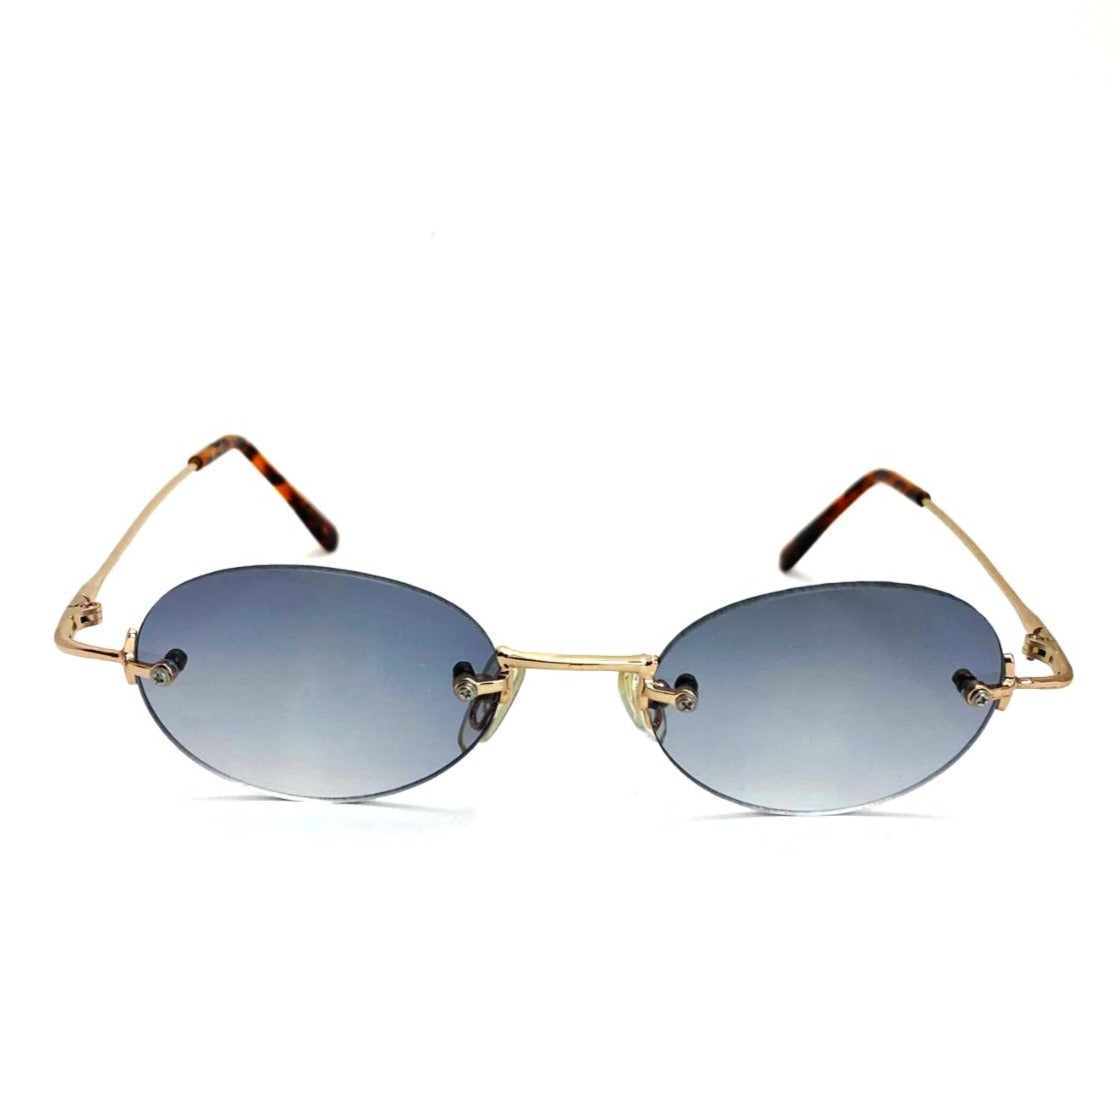 1990s style vintage gold oval rimless sunglasses with grey lens 